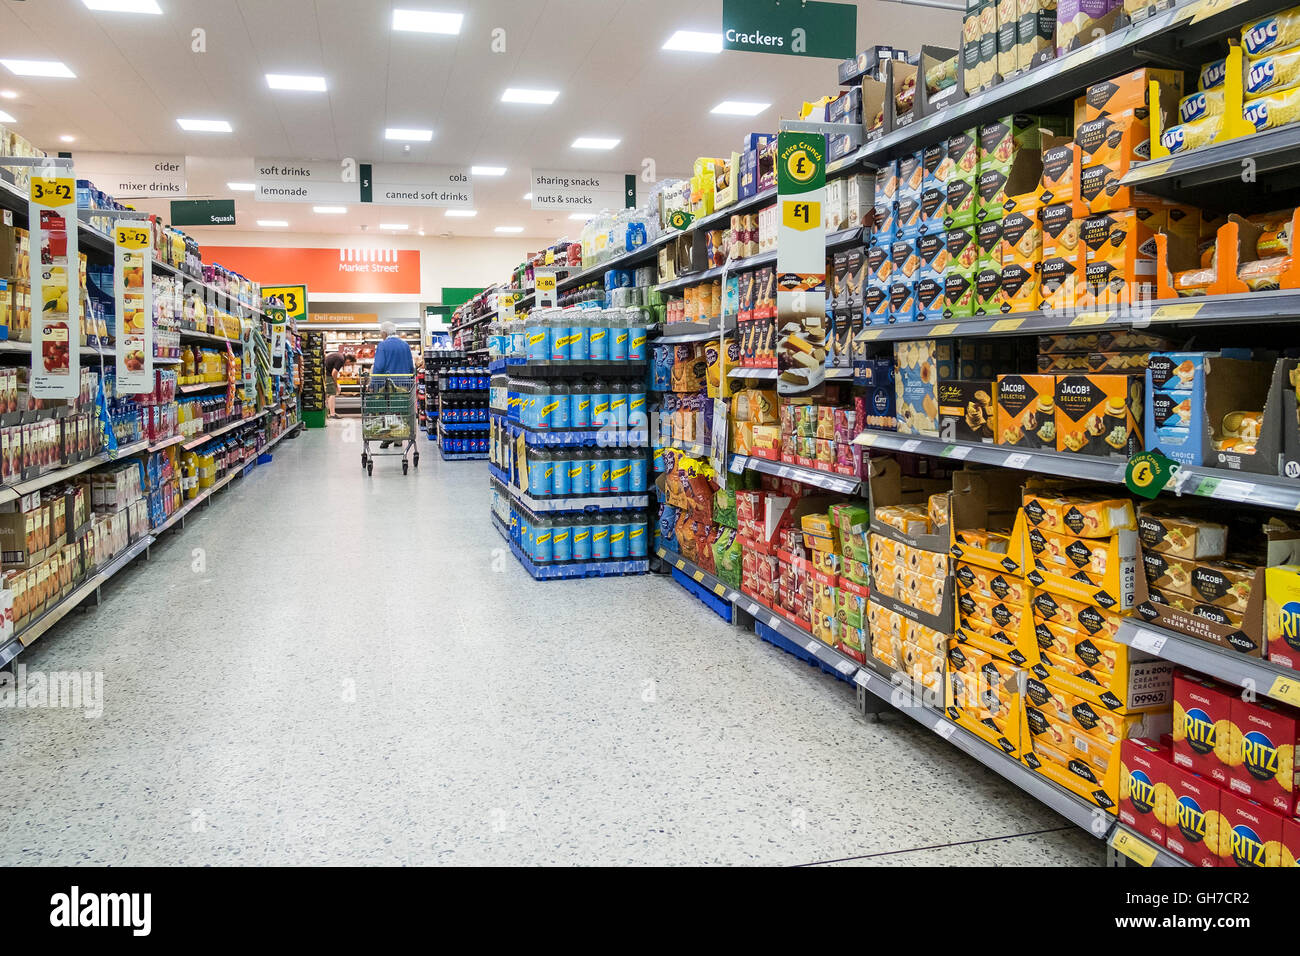 A shopping aisle in a Morrisons supermarket. Stock Photo